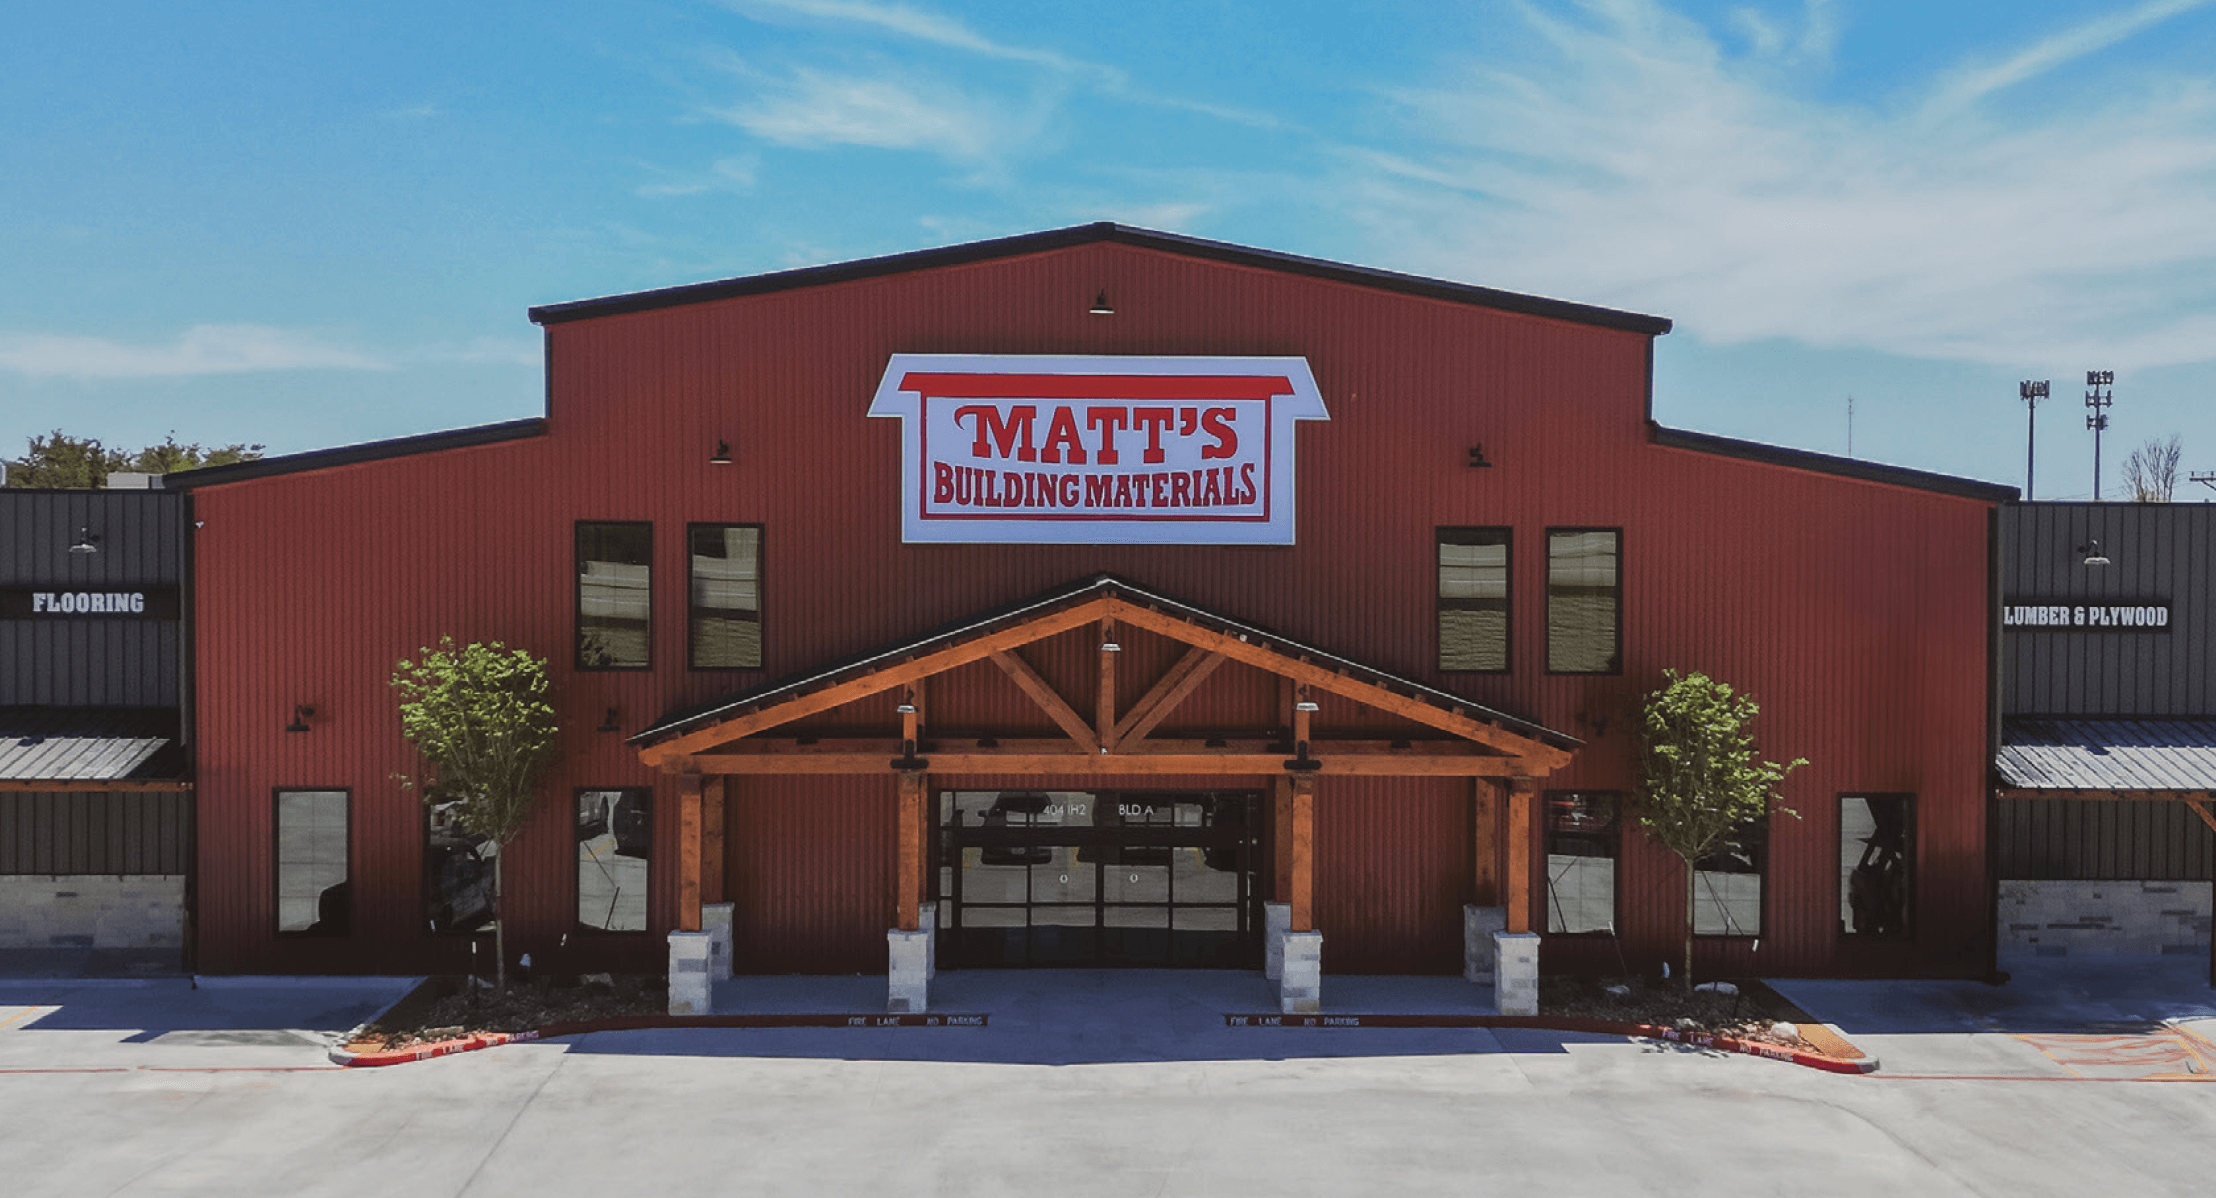 Matt’s Building Materials’ Journey from Ashes to Grand Opening